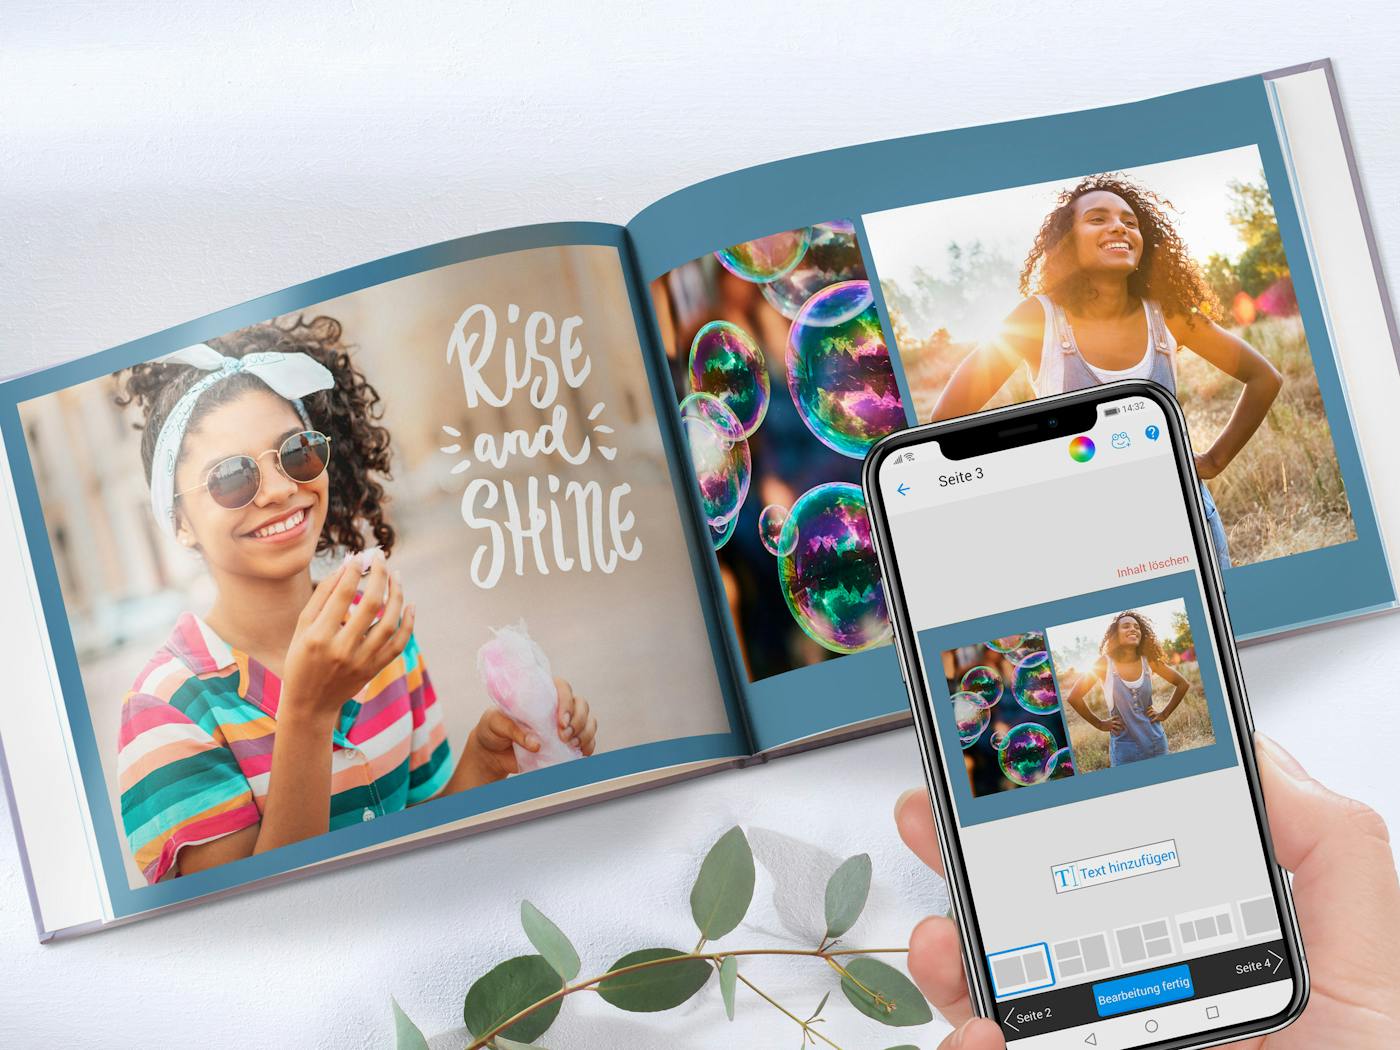 Creating a Photo Book Has Never Been Easier!